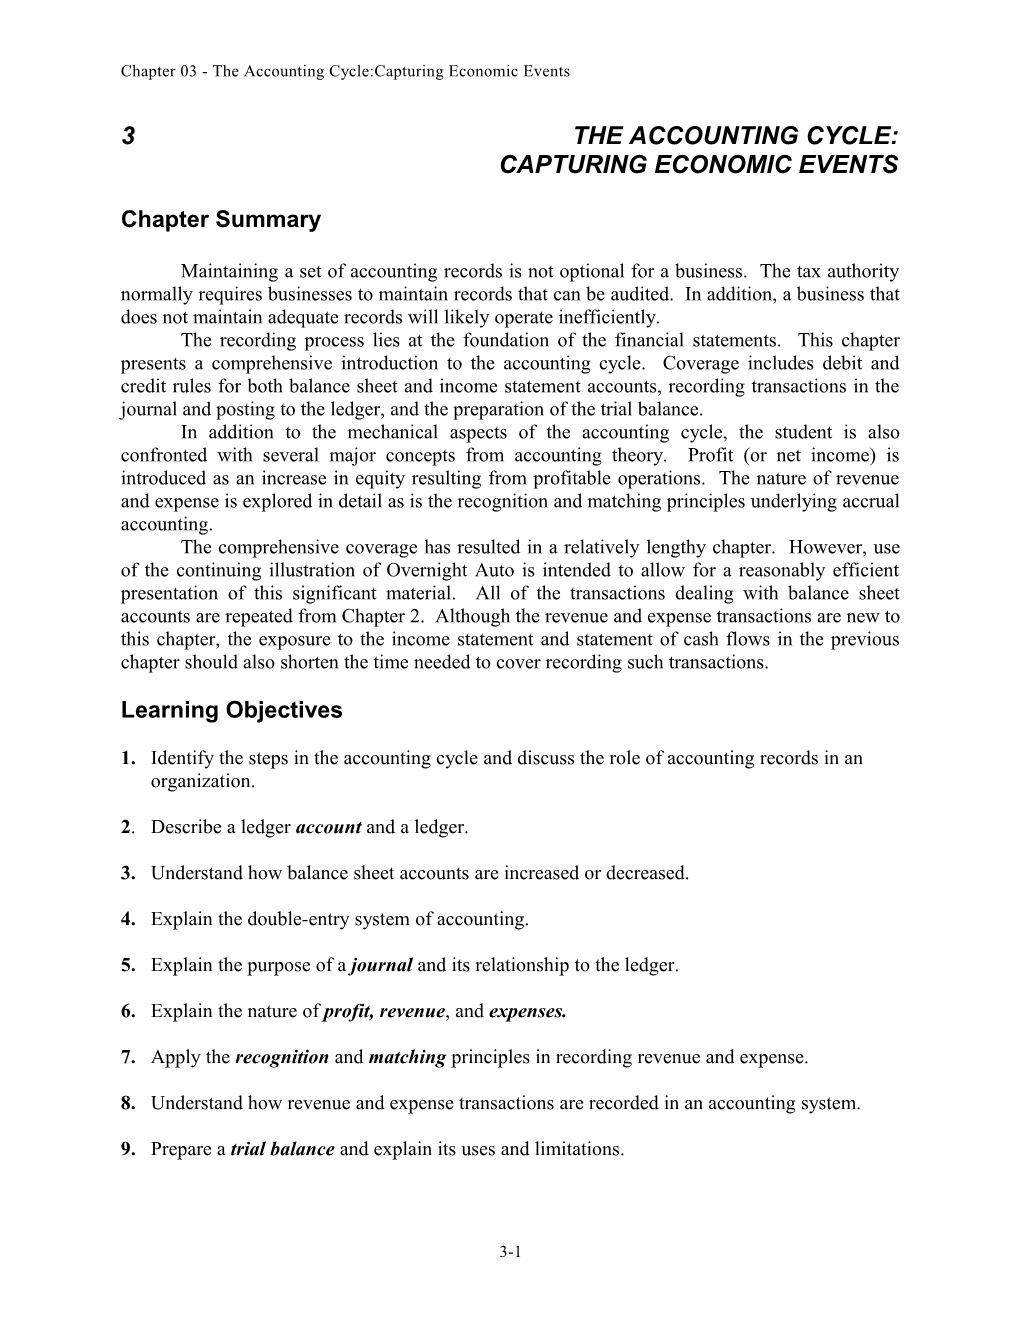 Chapter 03 - the Accounting Cycle:Capturing Economic Events